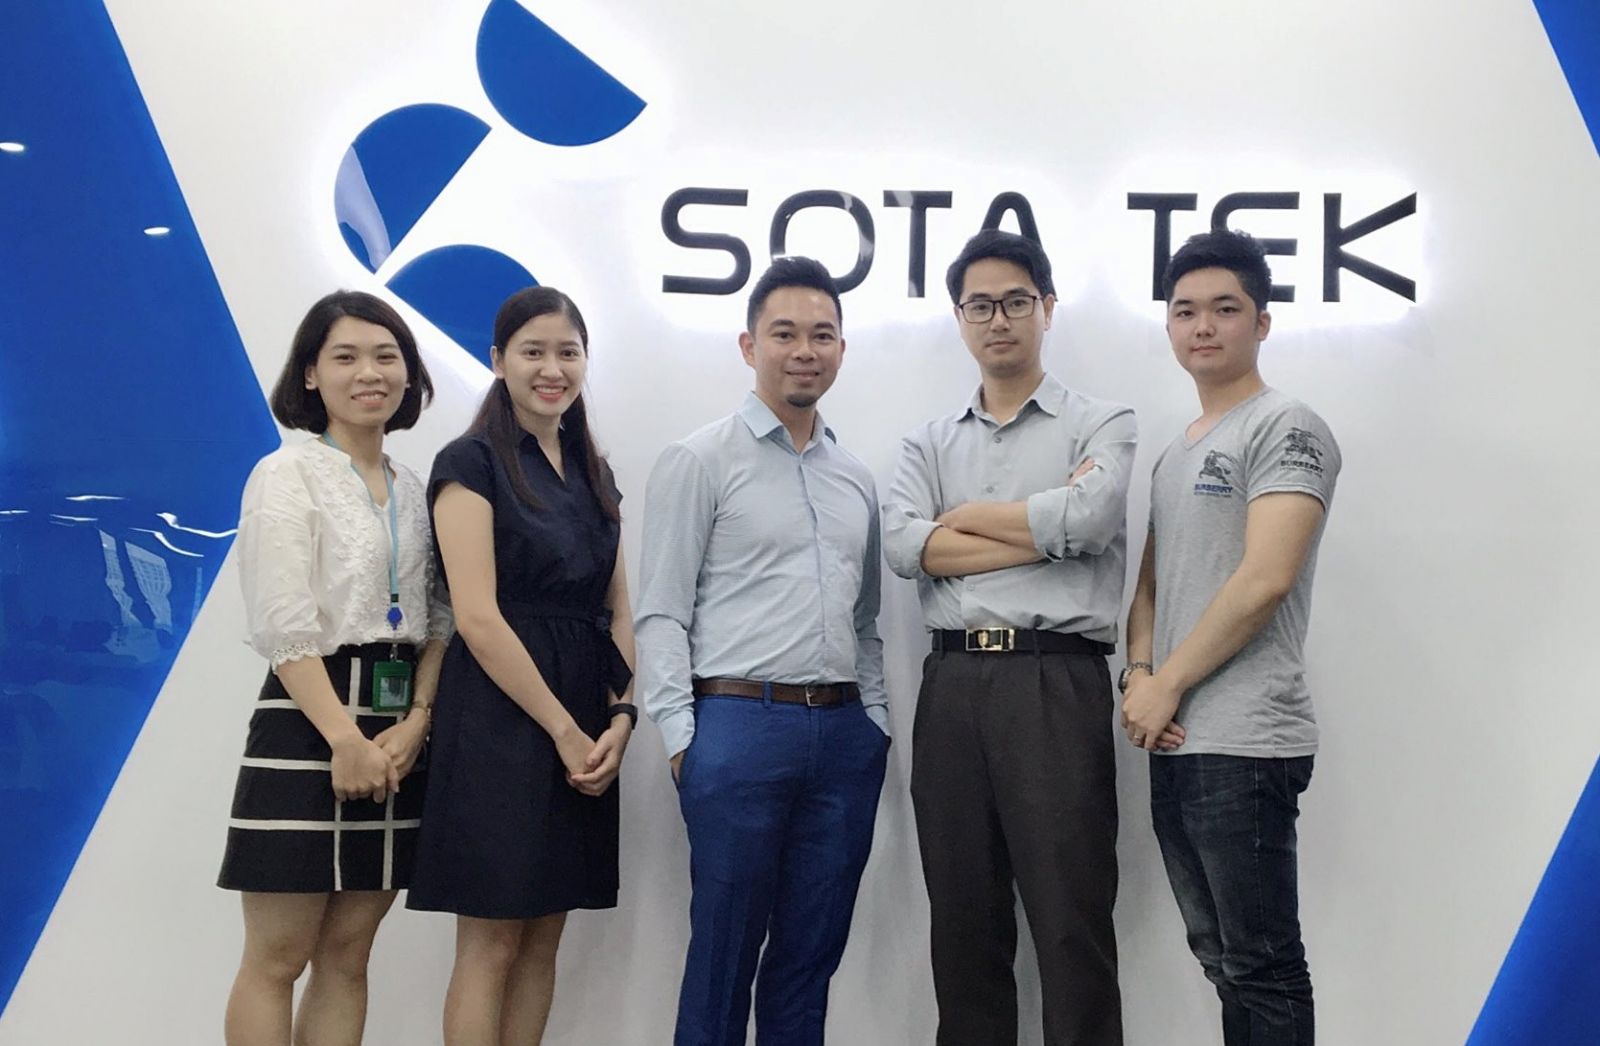 SotaTek to be the first partner of Keyreply in Vietnam